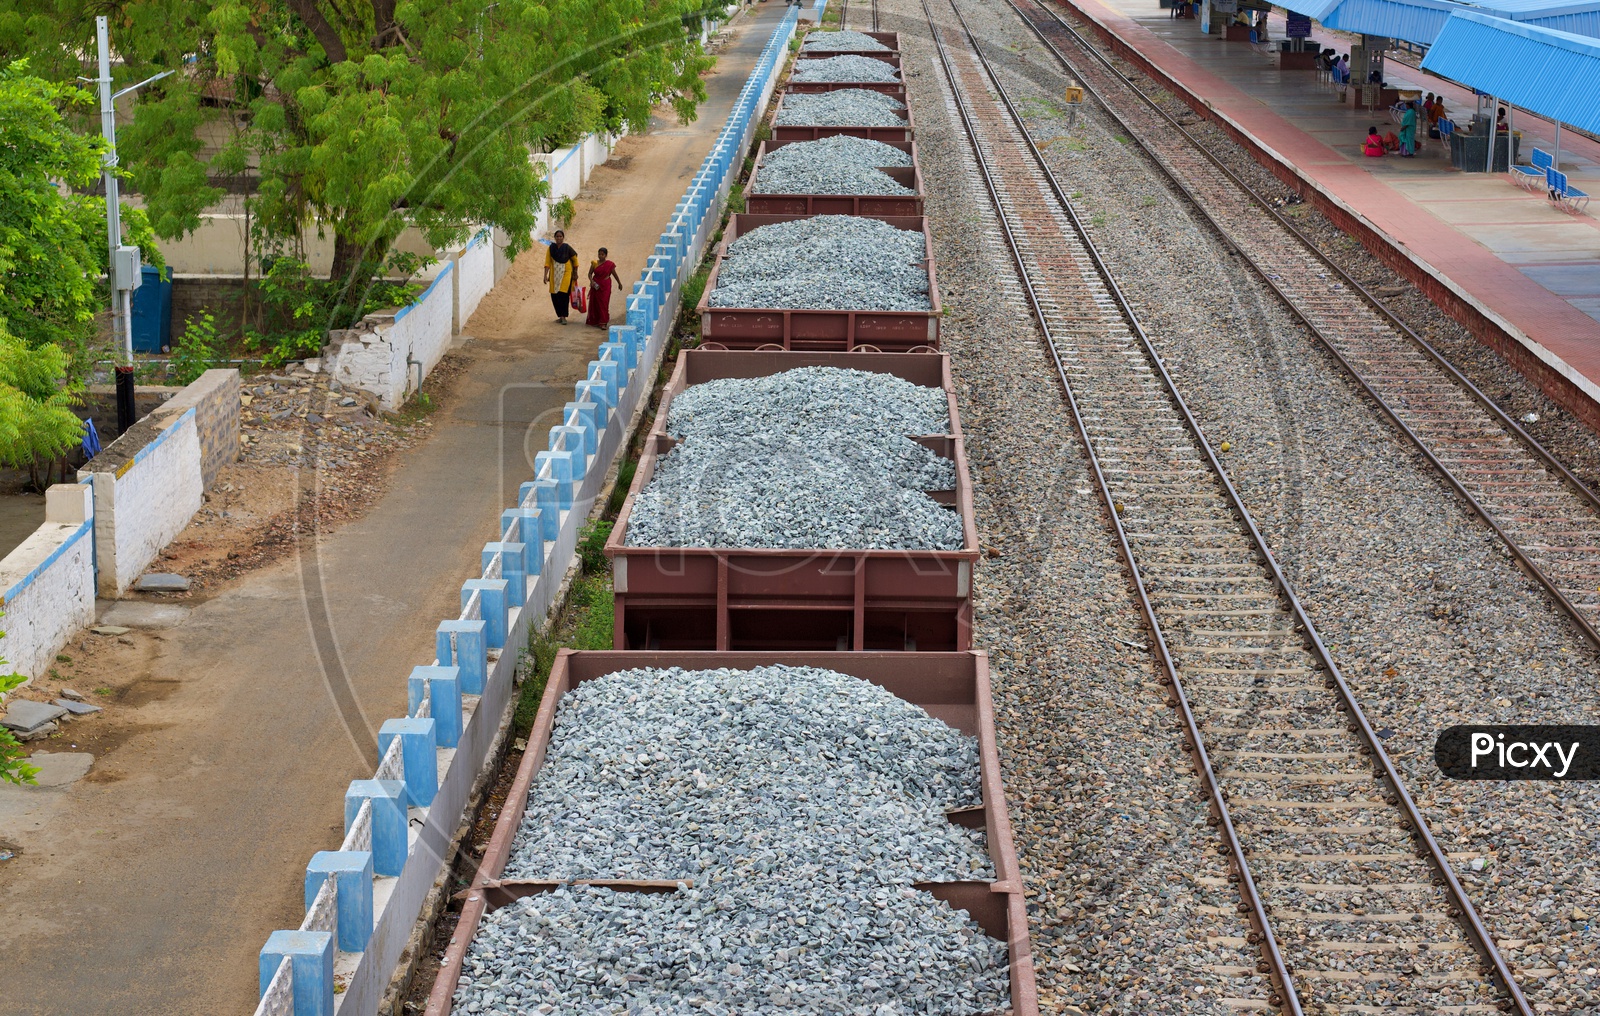 A goods train containing stones.